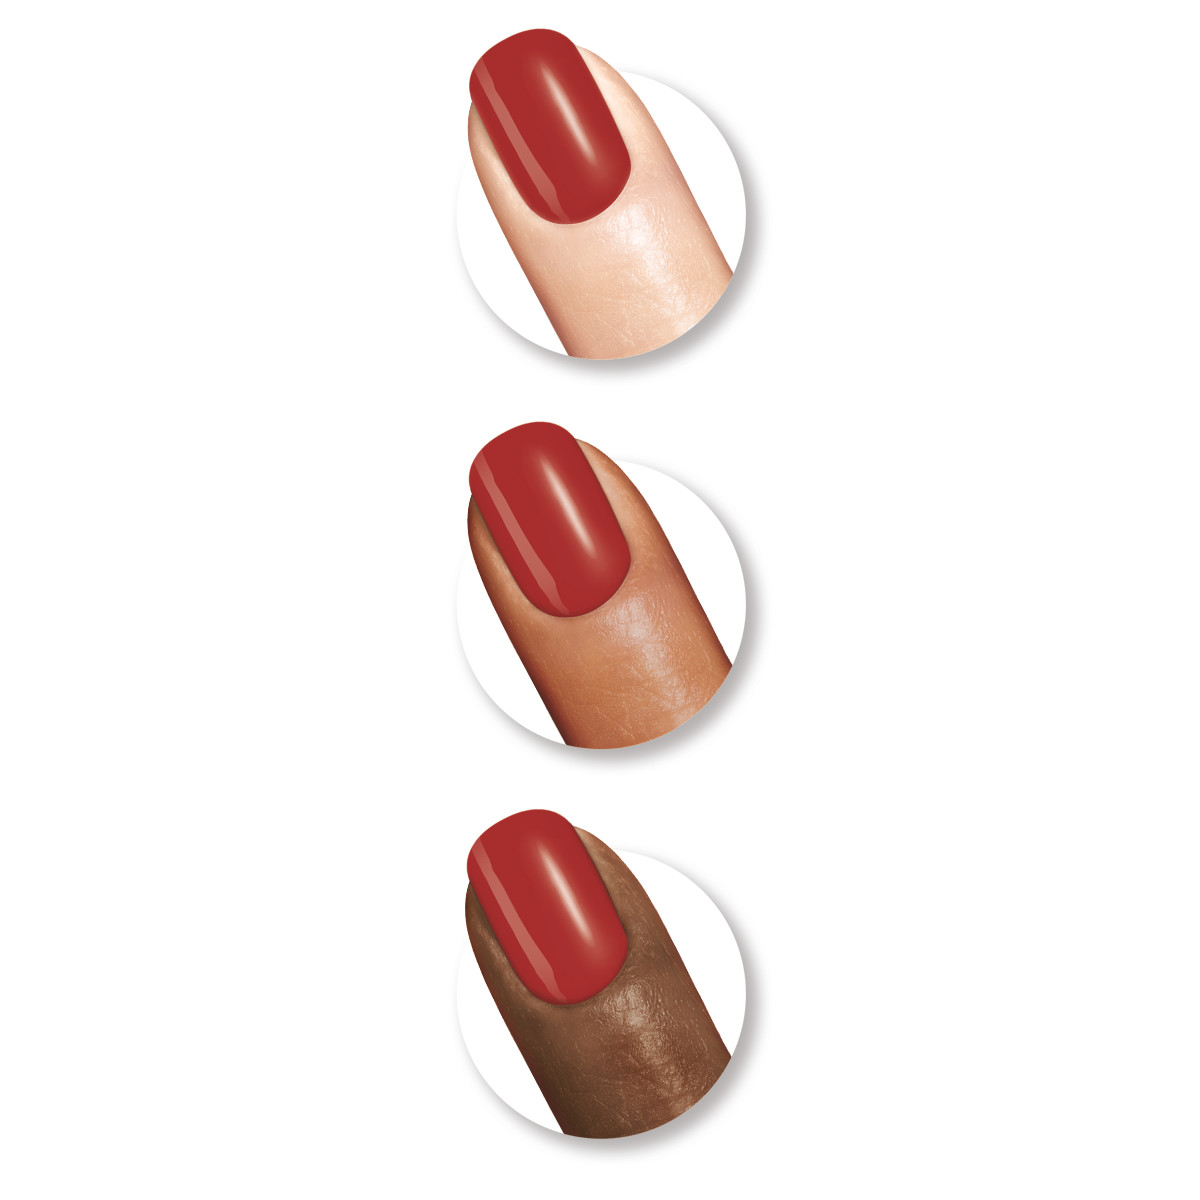 Sally Hansen Complete Salon Manicure Nail Color, Scarlet Lacquer - image 3 of 3